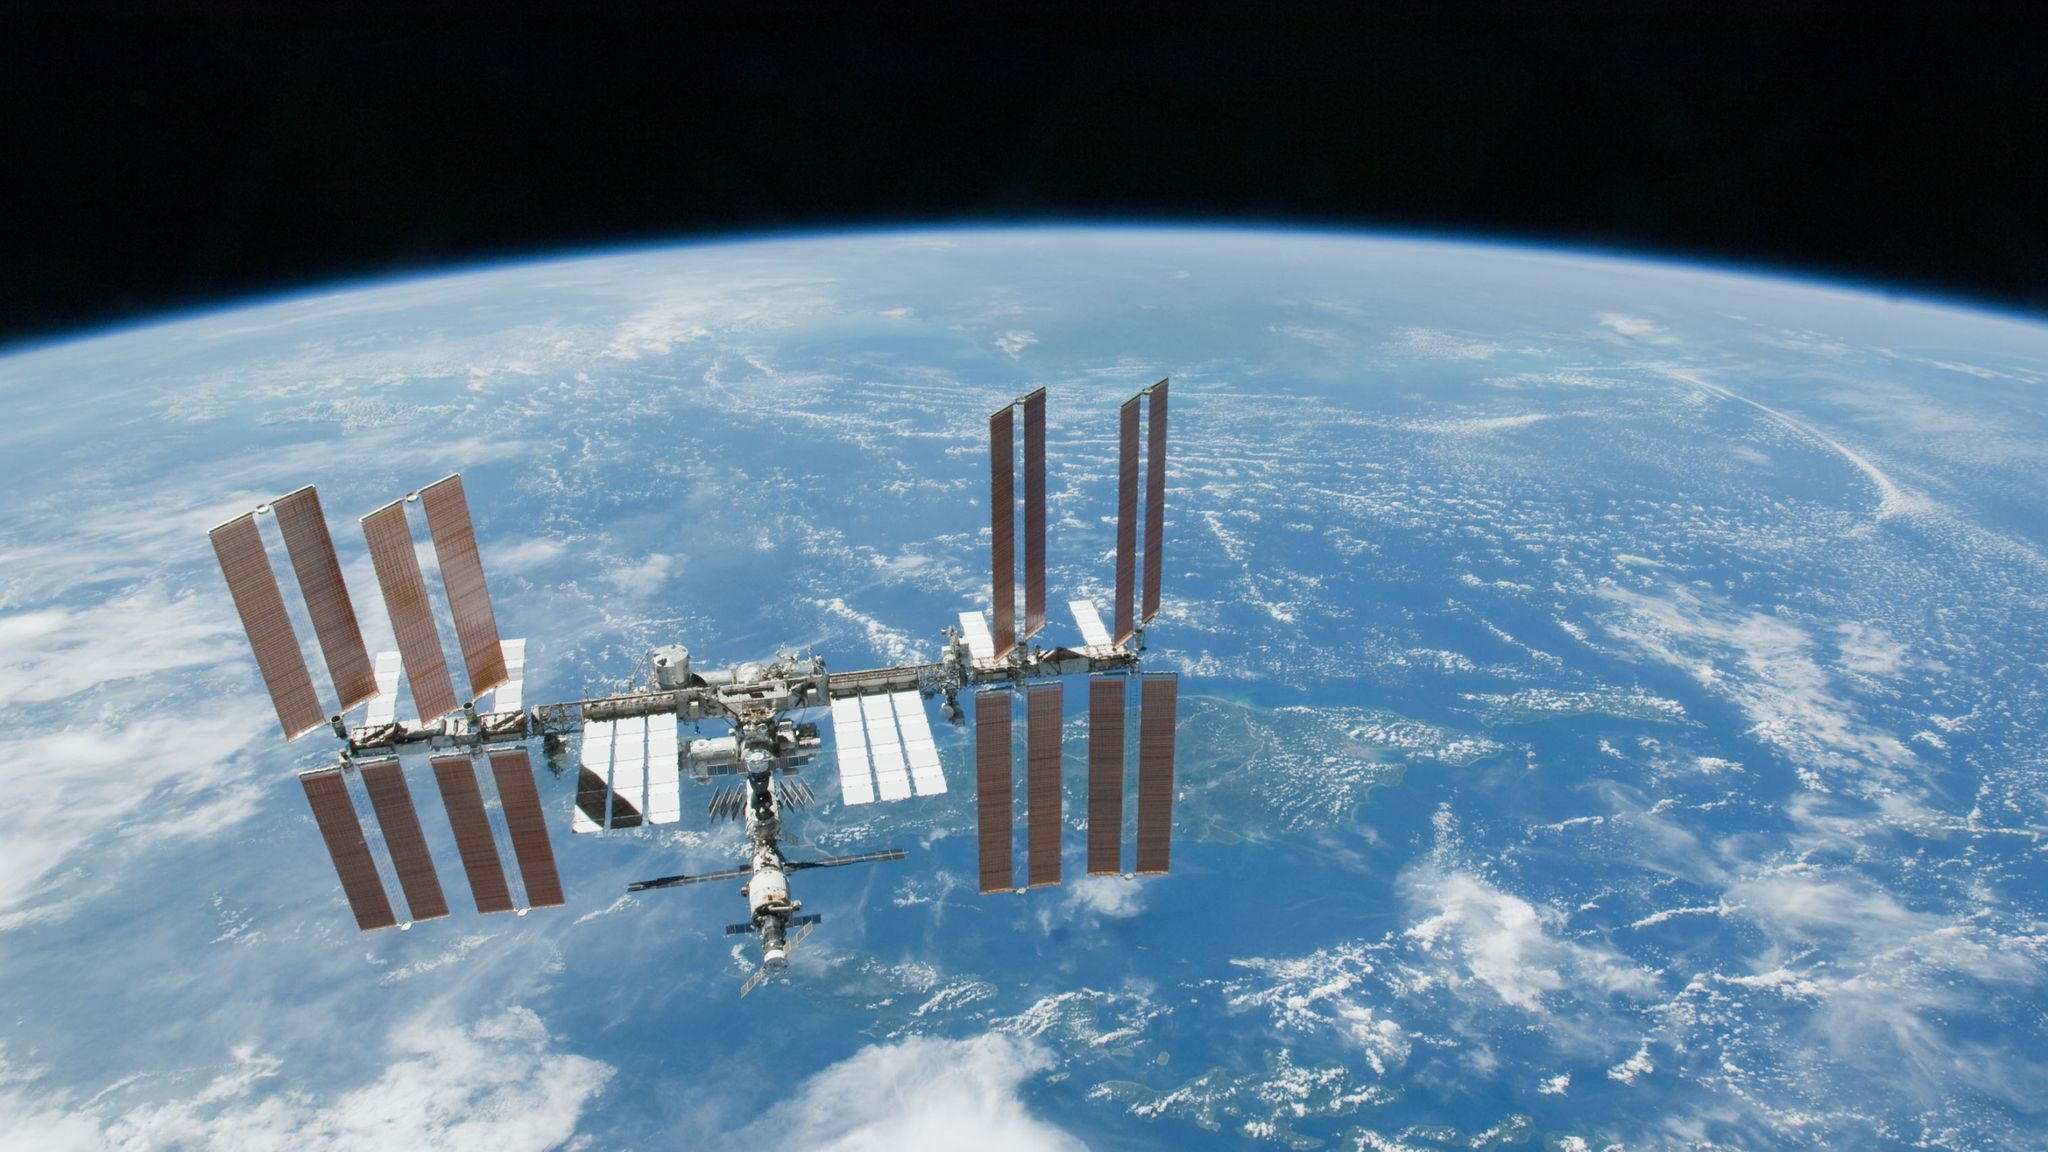 NASA plans to take International Space Station out of orbit in January 2031  by crashing it into 'spacecraft cemetery' | Science & Tech News | Sky News